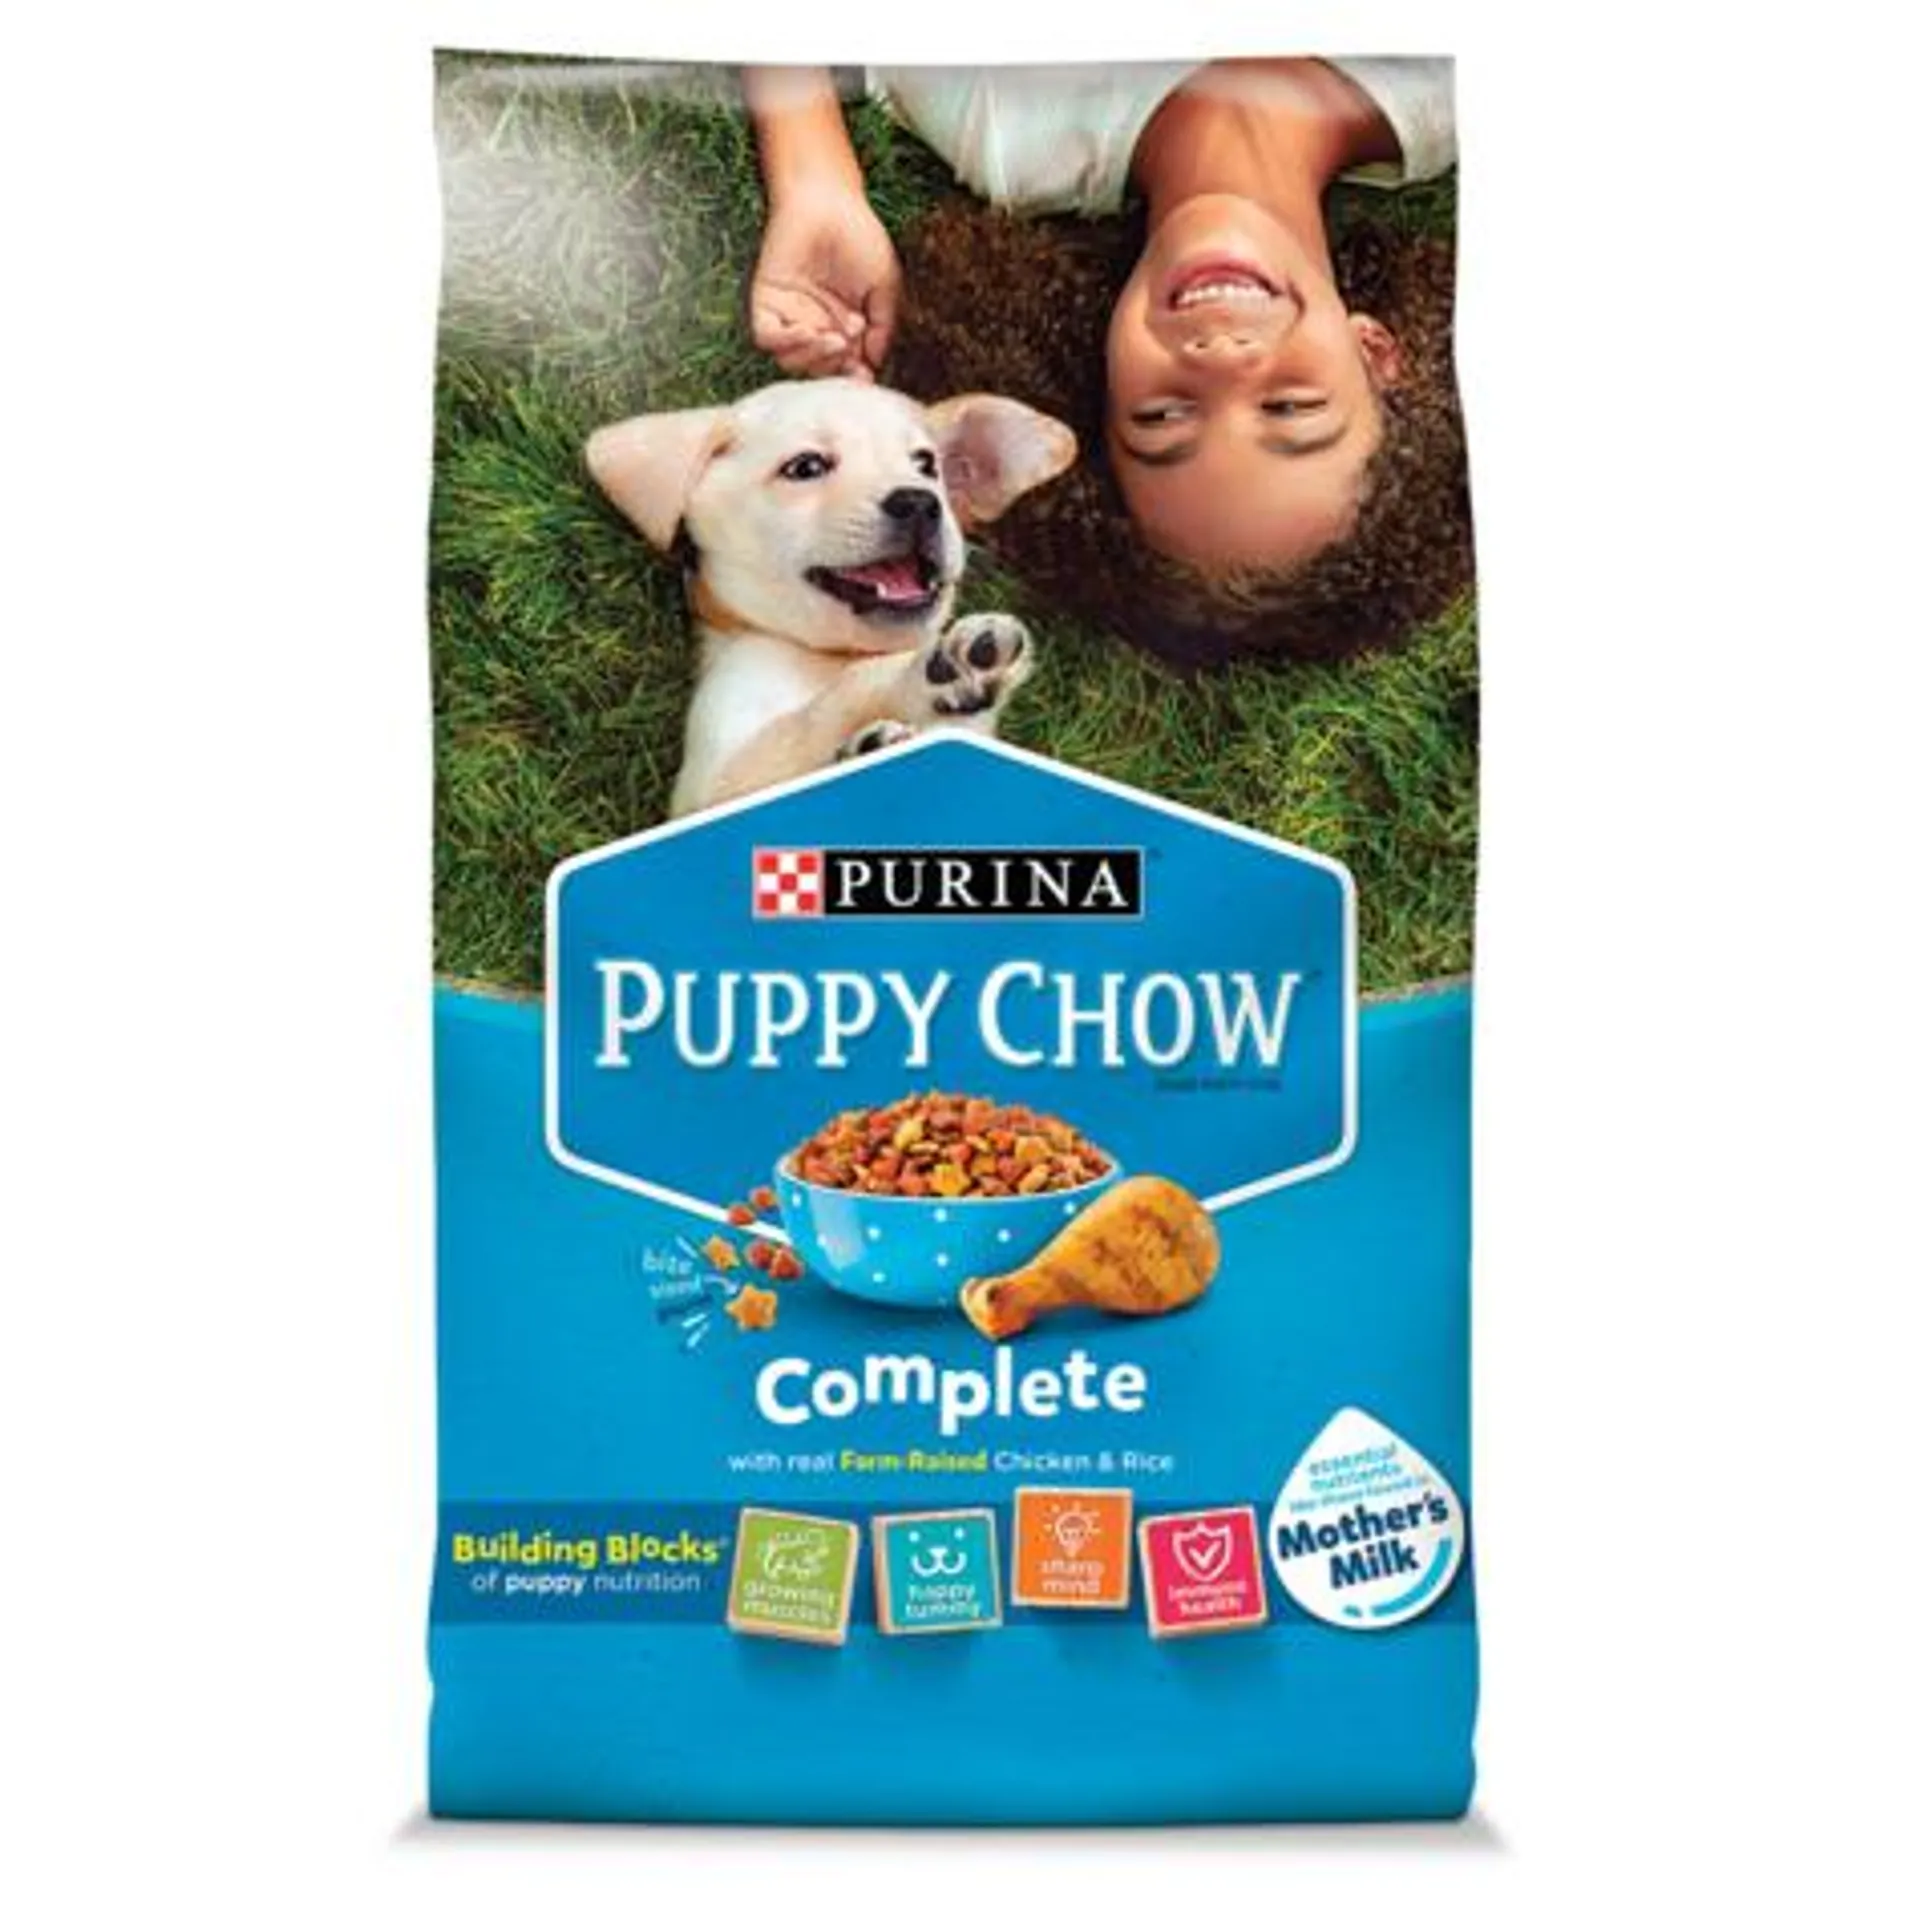 Purina Puppy Chow Chicken & Rice 16.5lb Bag